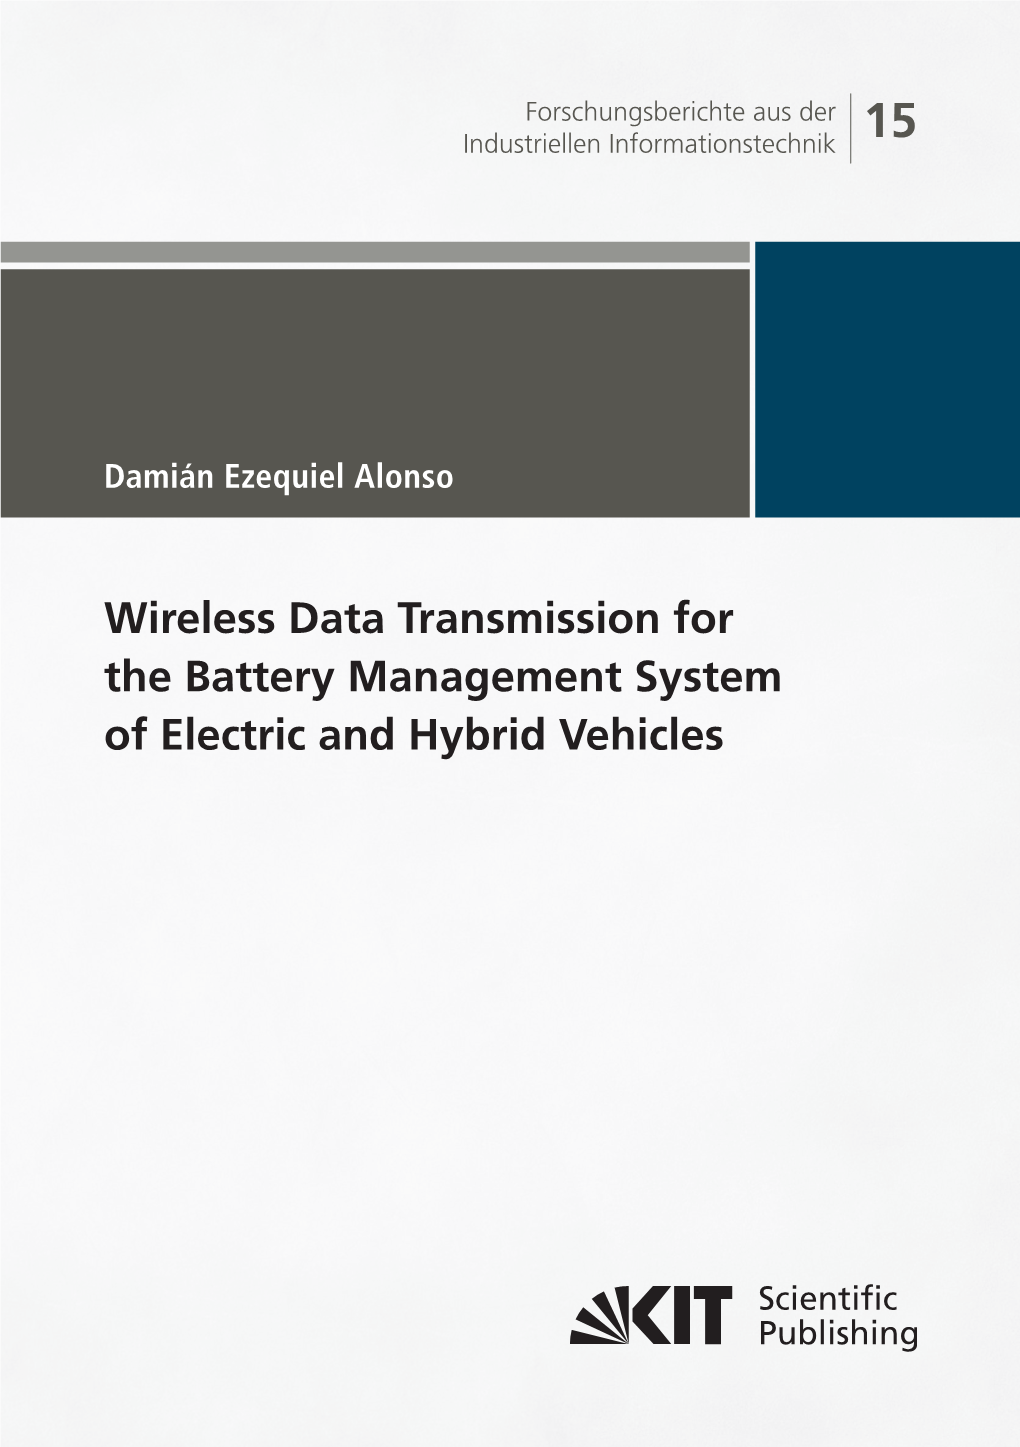 Wireless Data Transmission for the Battery Management System Of